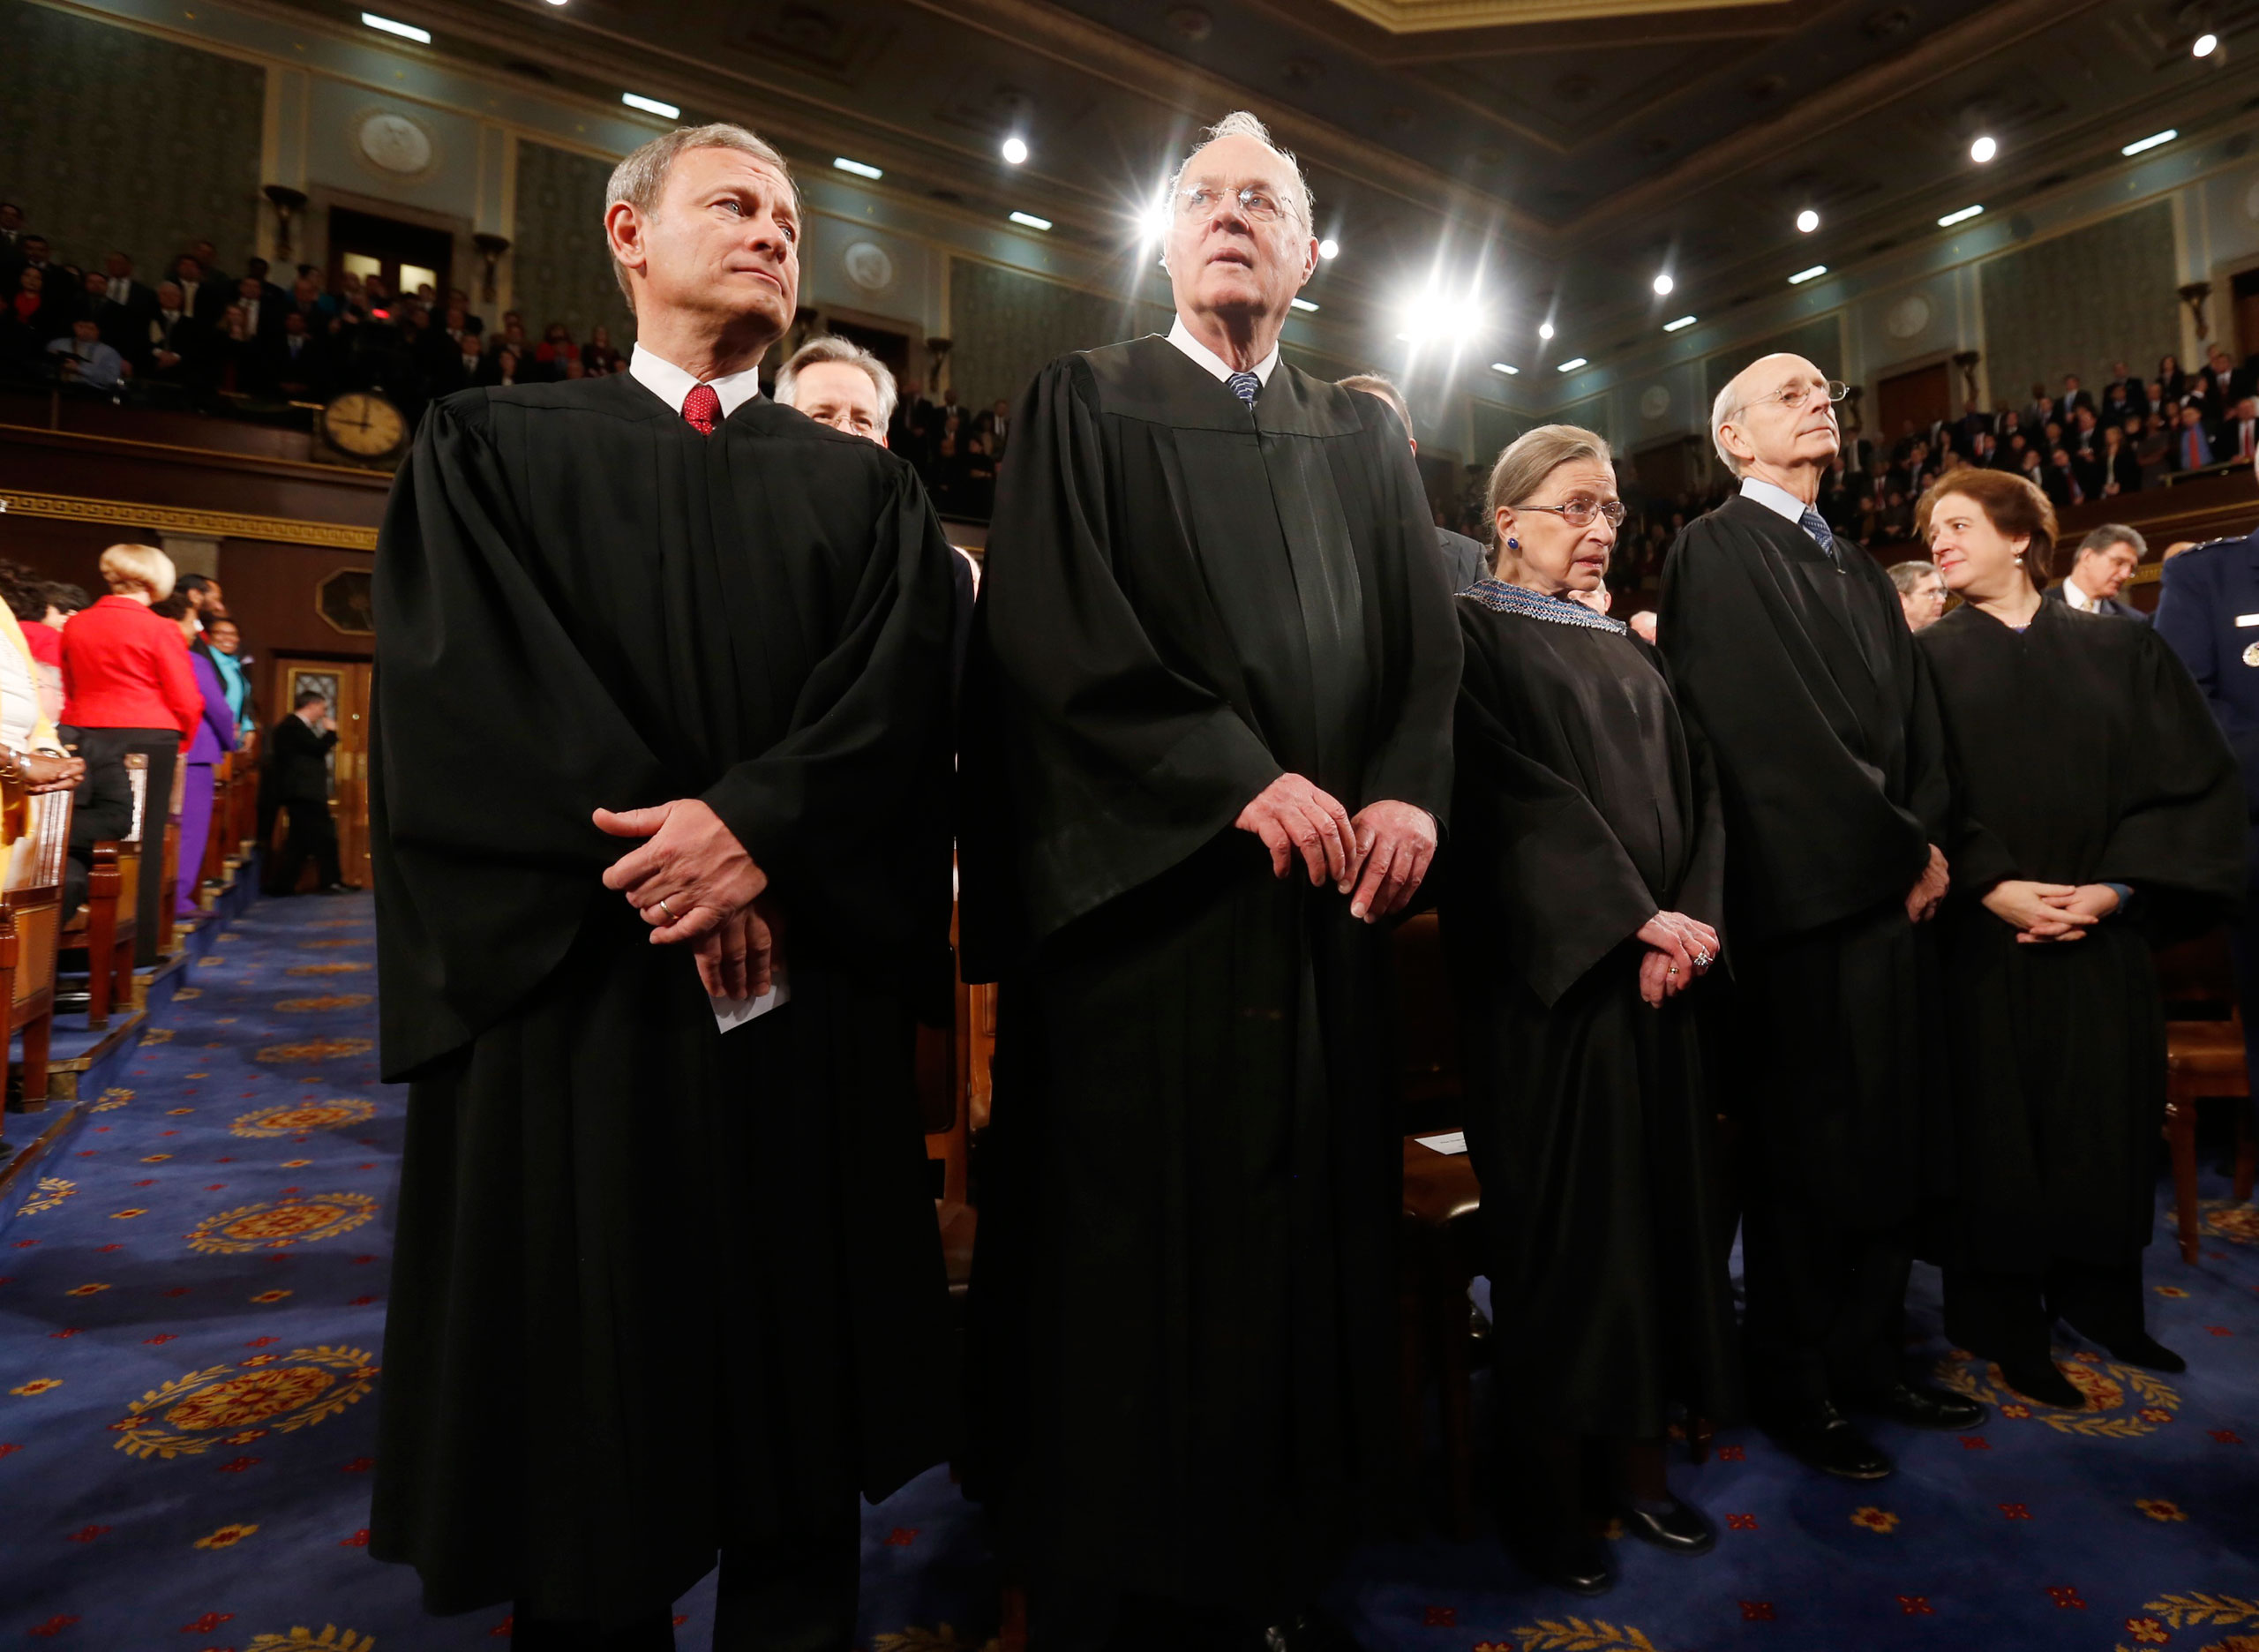 From left: U.S. Supreme Court Chief Justice John Roberts stands with fellow Justices Anthony Kennedy, Ruth Bader Ginsburg, Stephen Breyer and Elena Kagan prior to President Barack Obama's State of the Union speech on Capitol Hill in Washington, D.C. on  Jan. 28, 2014.